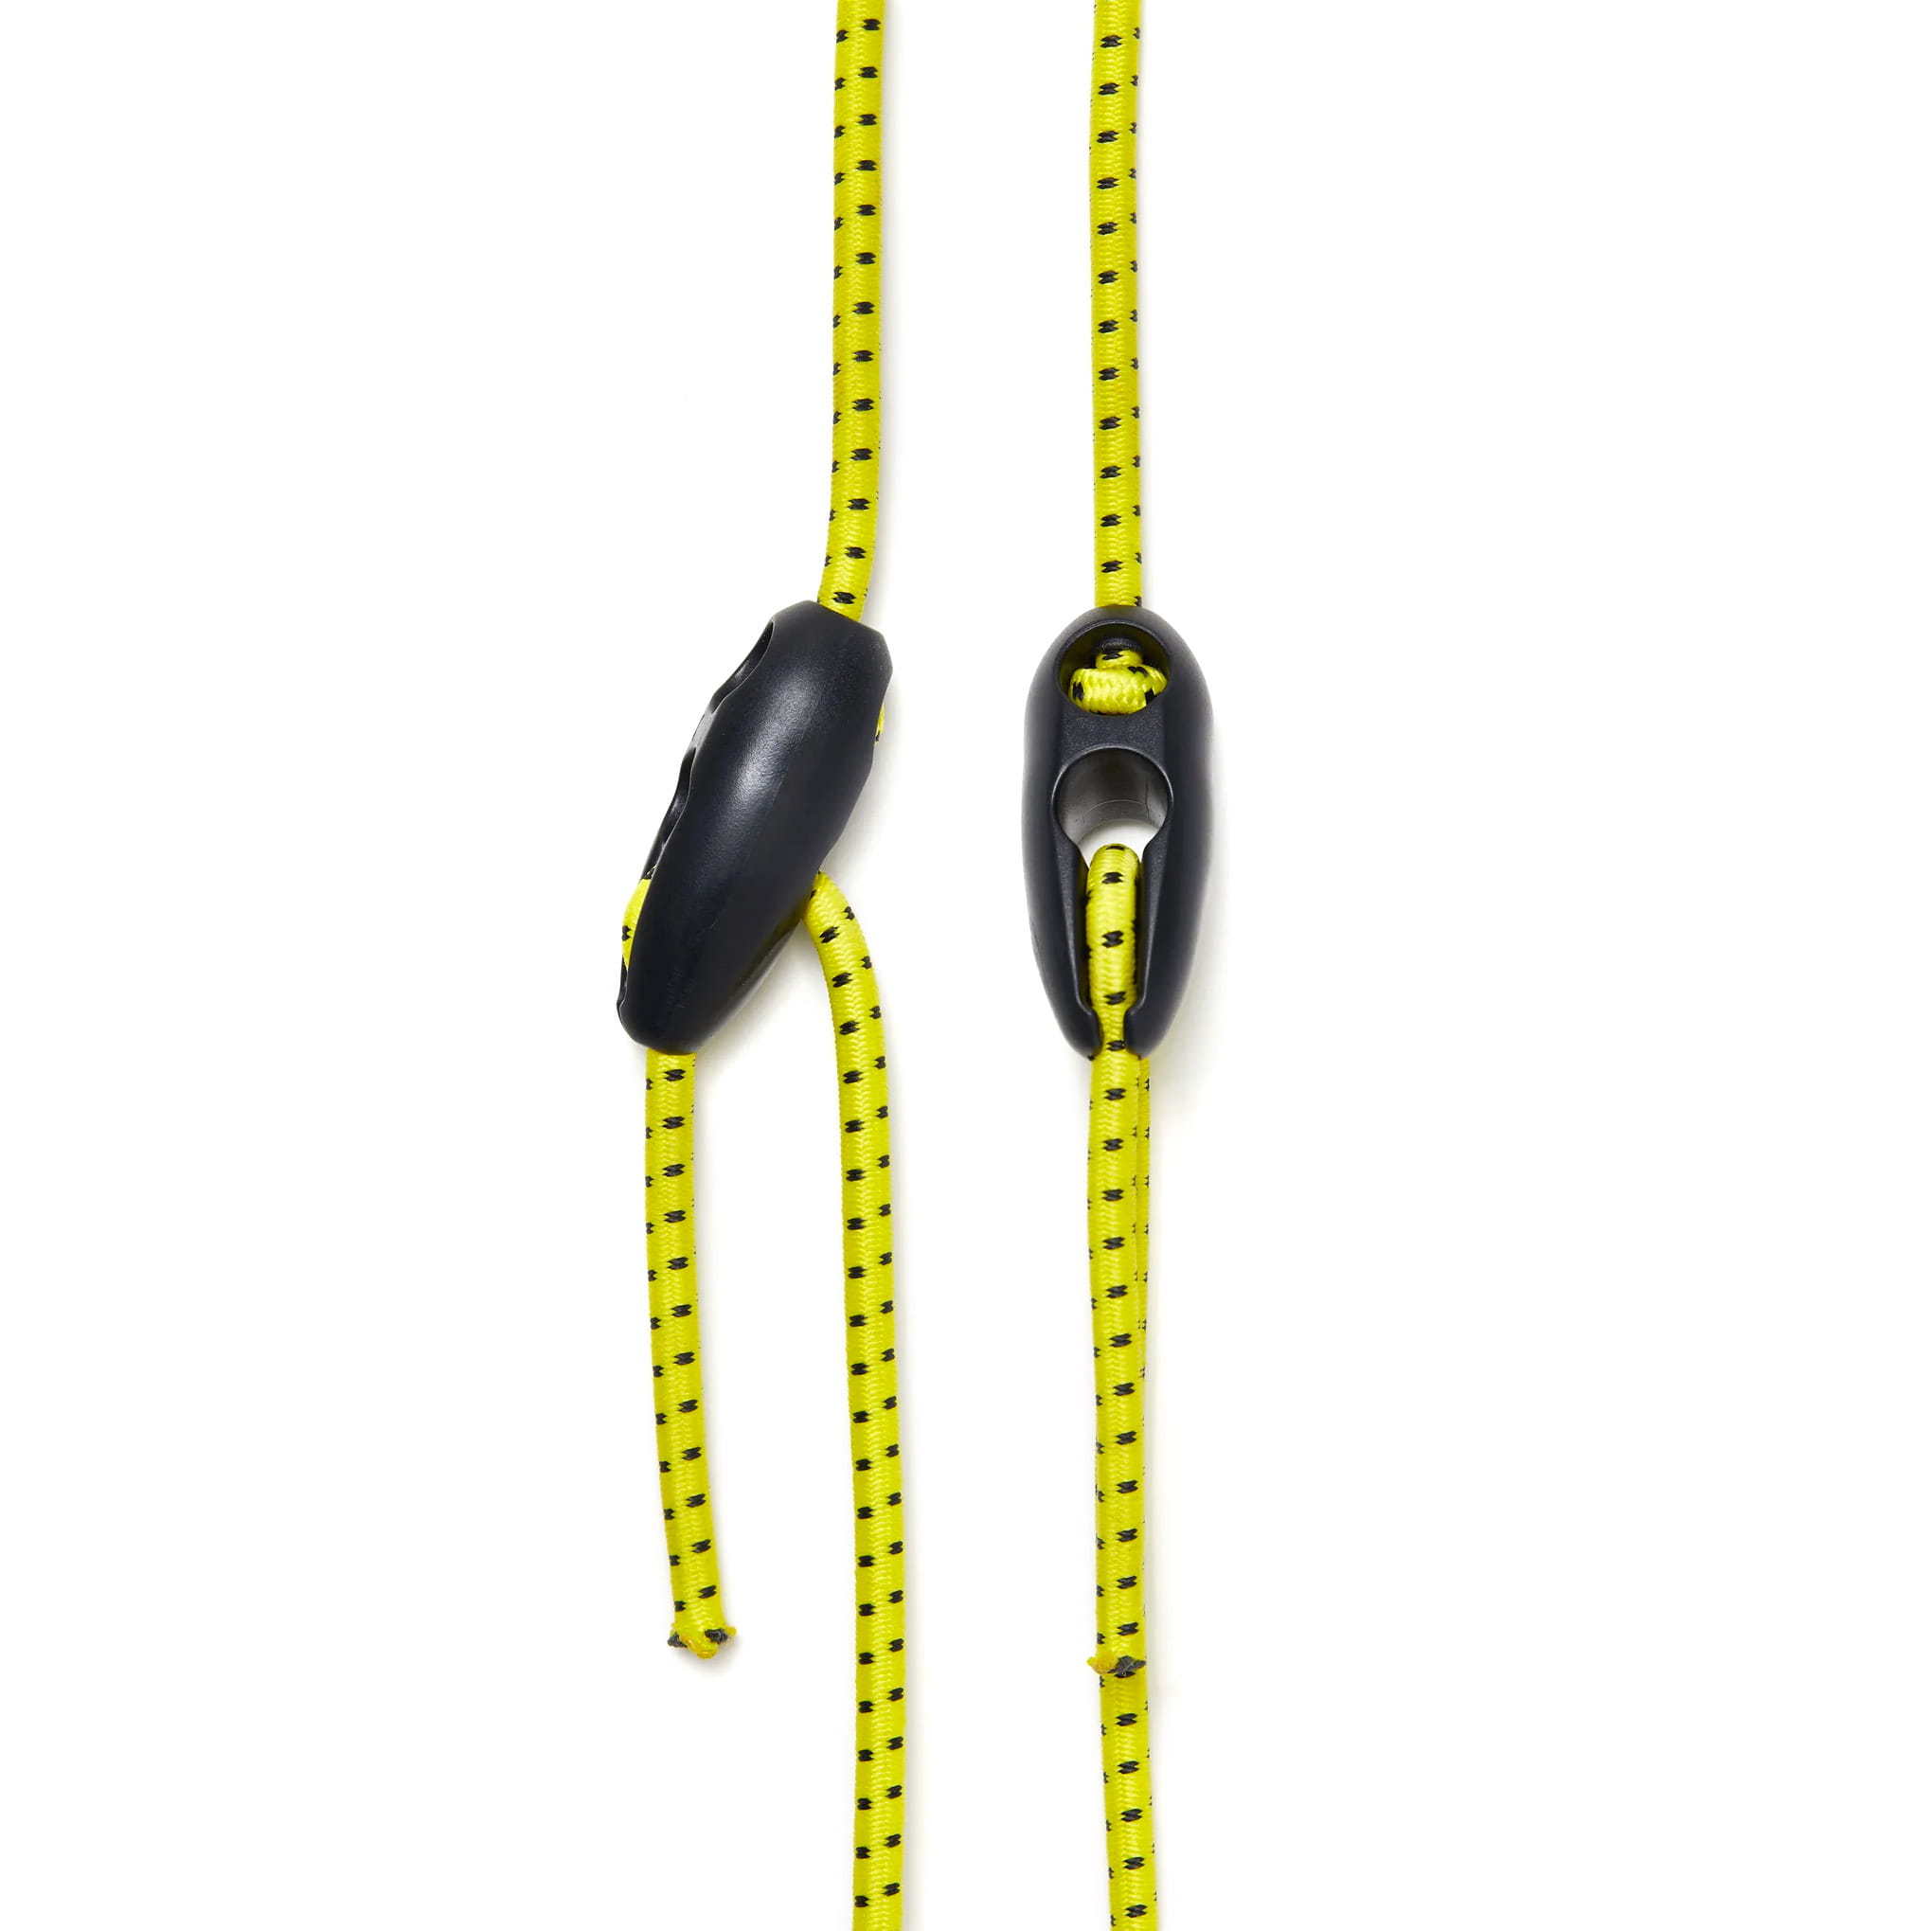 Jack Straps Bungee Cords Pair